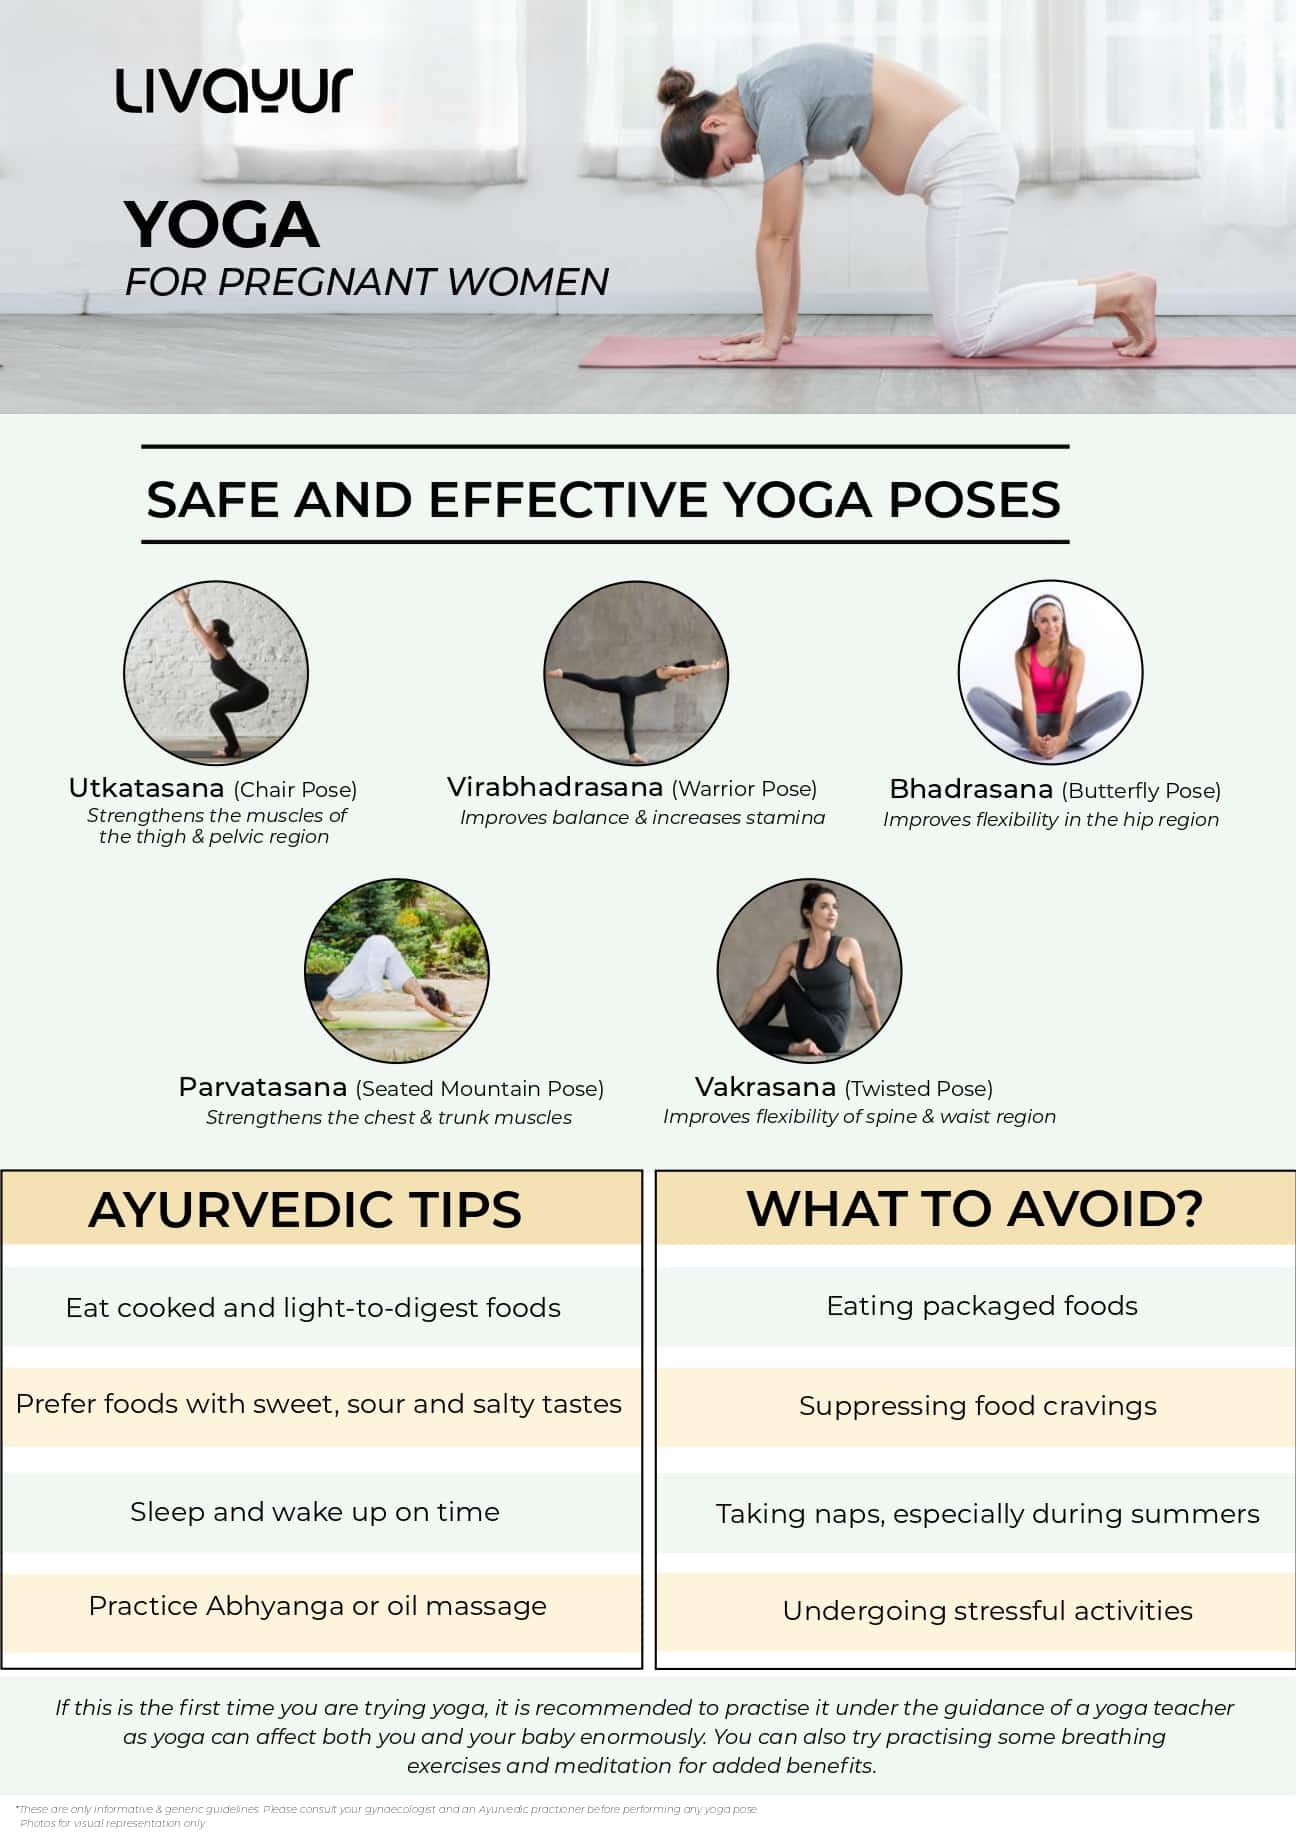 Yoga Poses That Are Safe During Pregnancy - Women Fitness